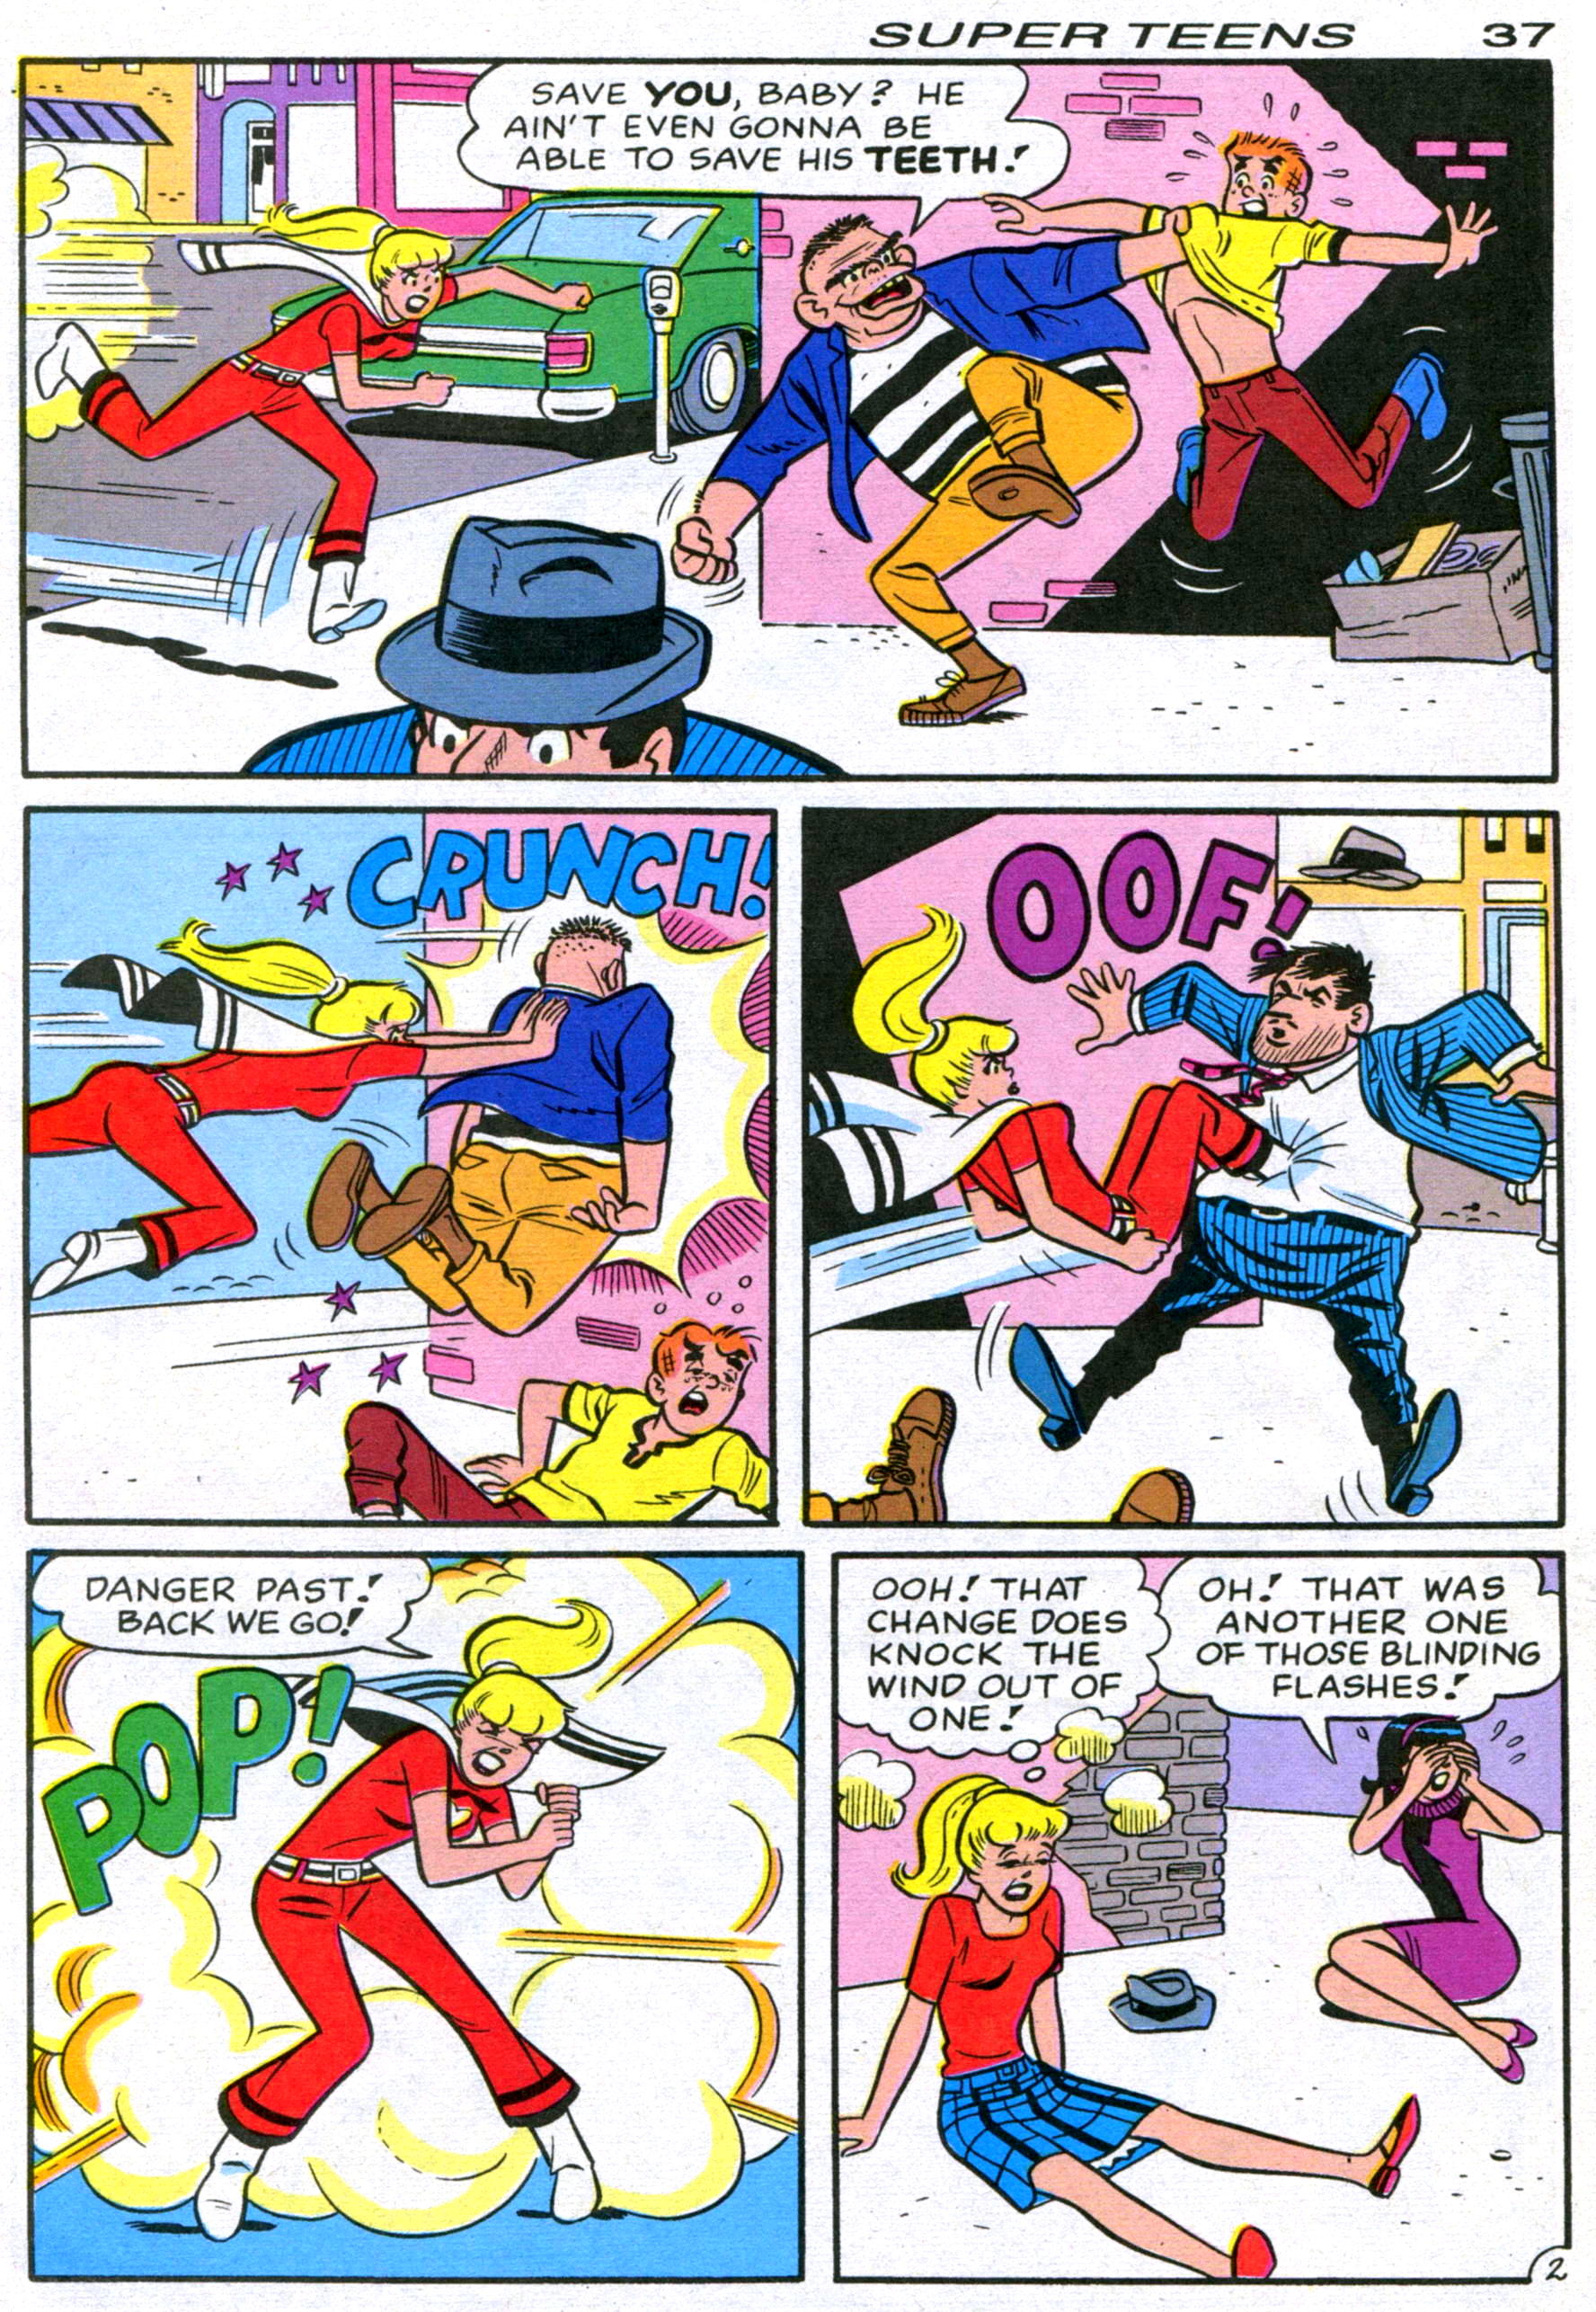 Read online Archie's Super Teens comic -  Issue #1 - 39